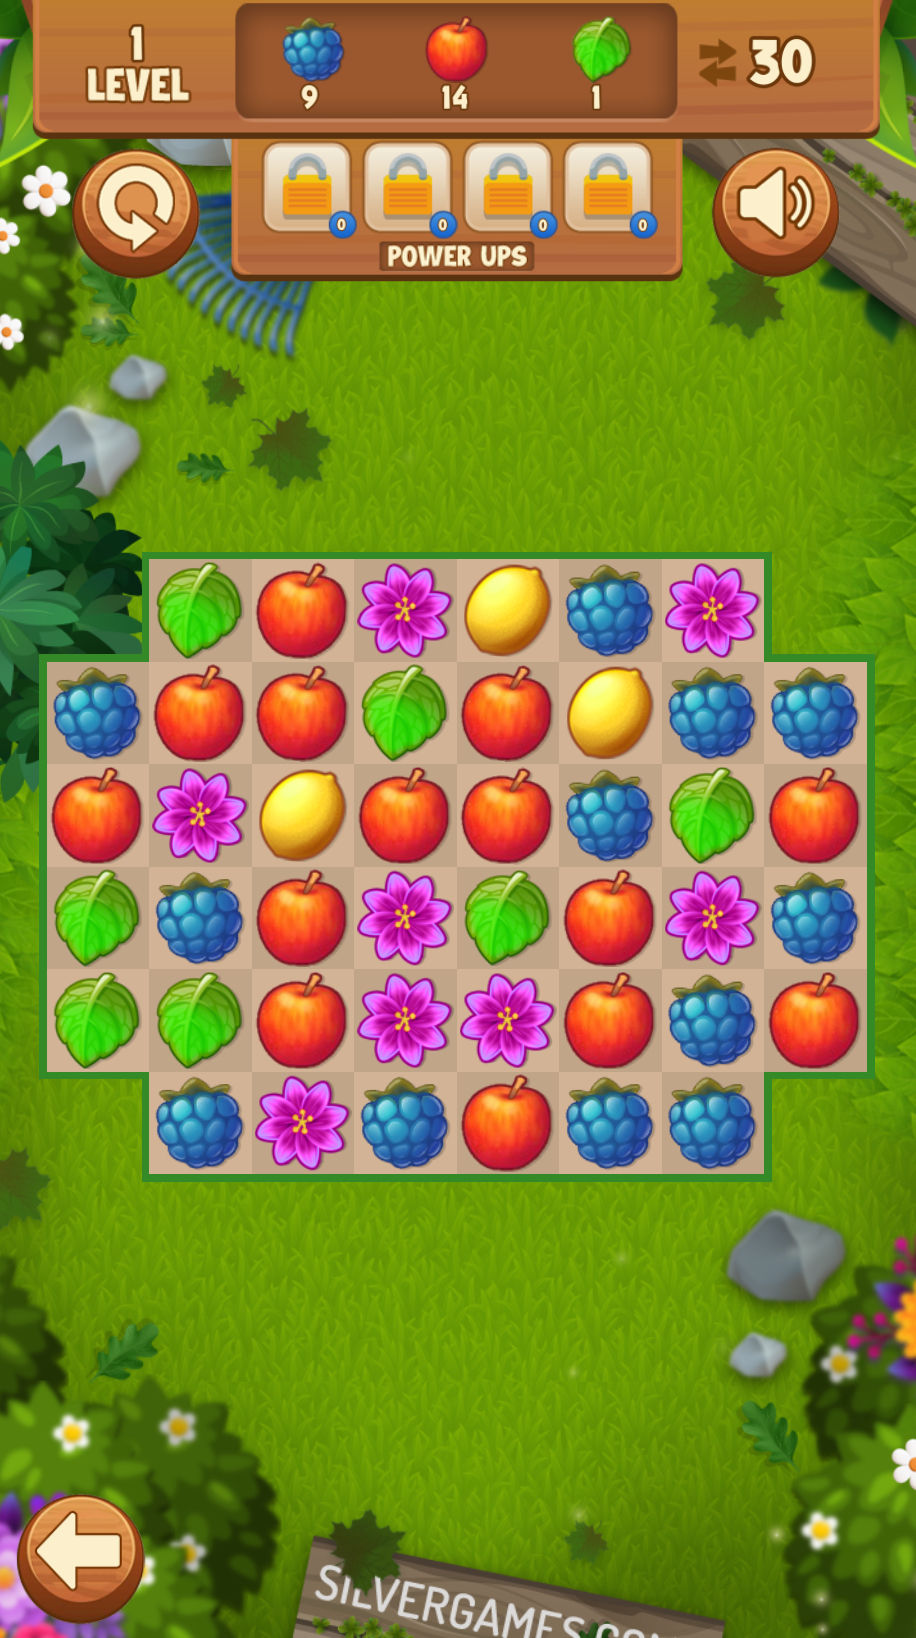 Candy Match Saga - Play Now 🕹️ Online Games on UFreeGames